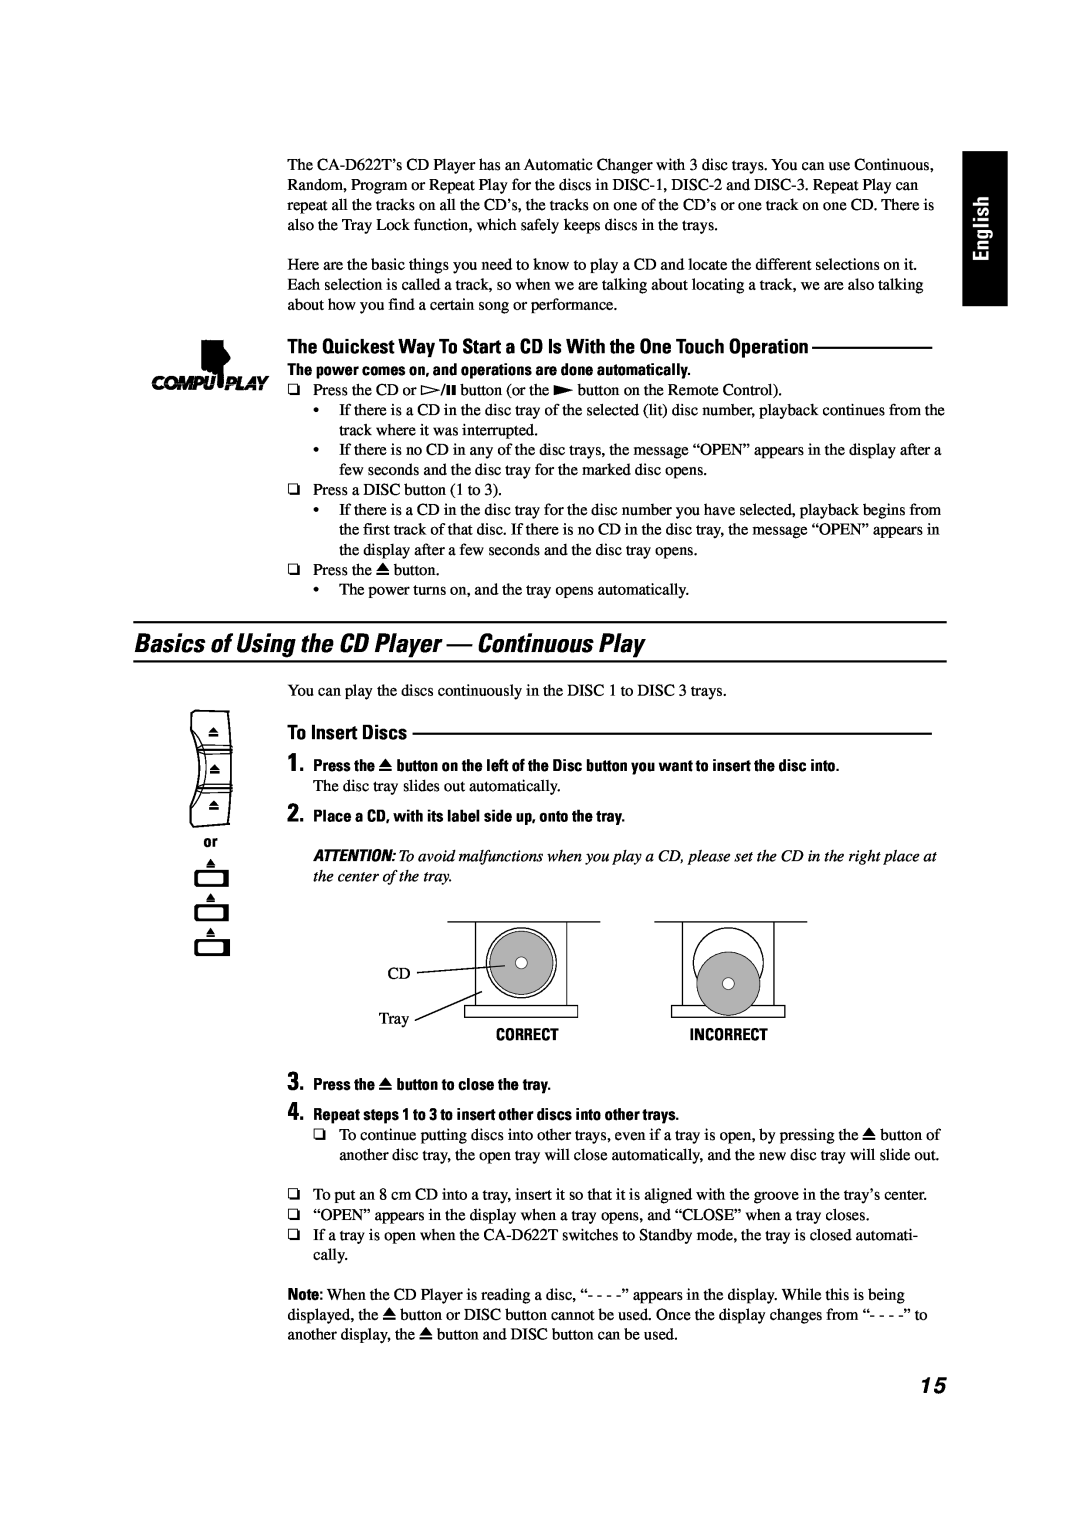 JVC GVT0001-002A manual Basics of Using the CD Player - Continuous Play, To Insert Discs, English, Correctincorrect 